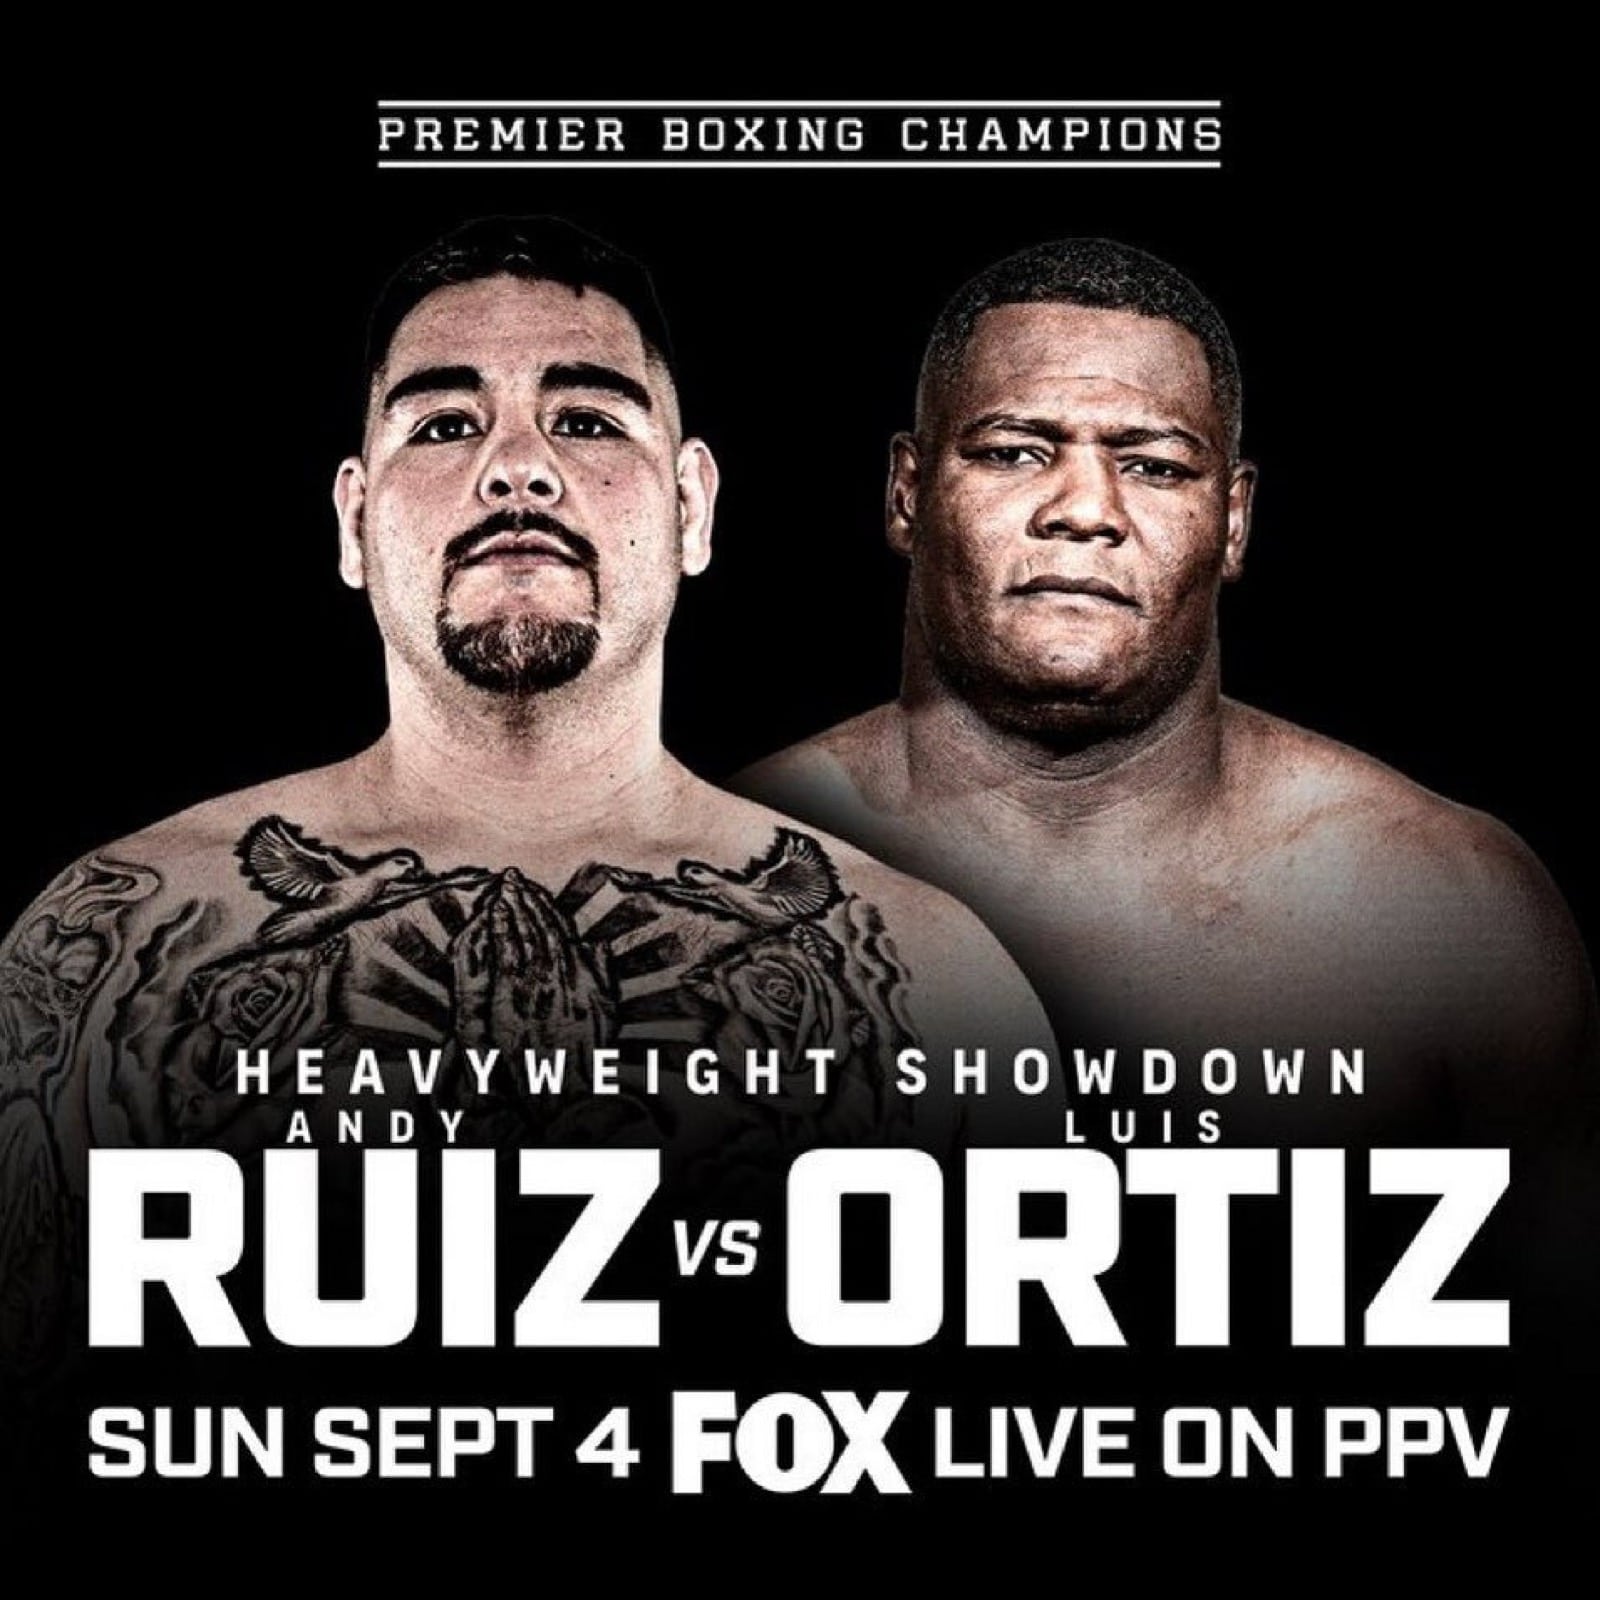 Image: Andy Ruiz "almost ready" for Luis Ortiz fight on Sept.4th